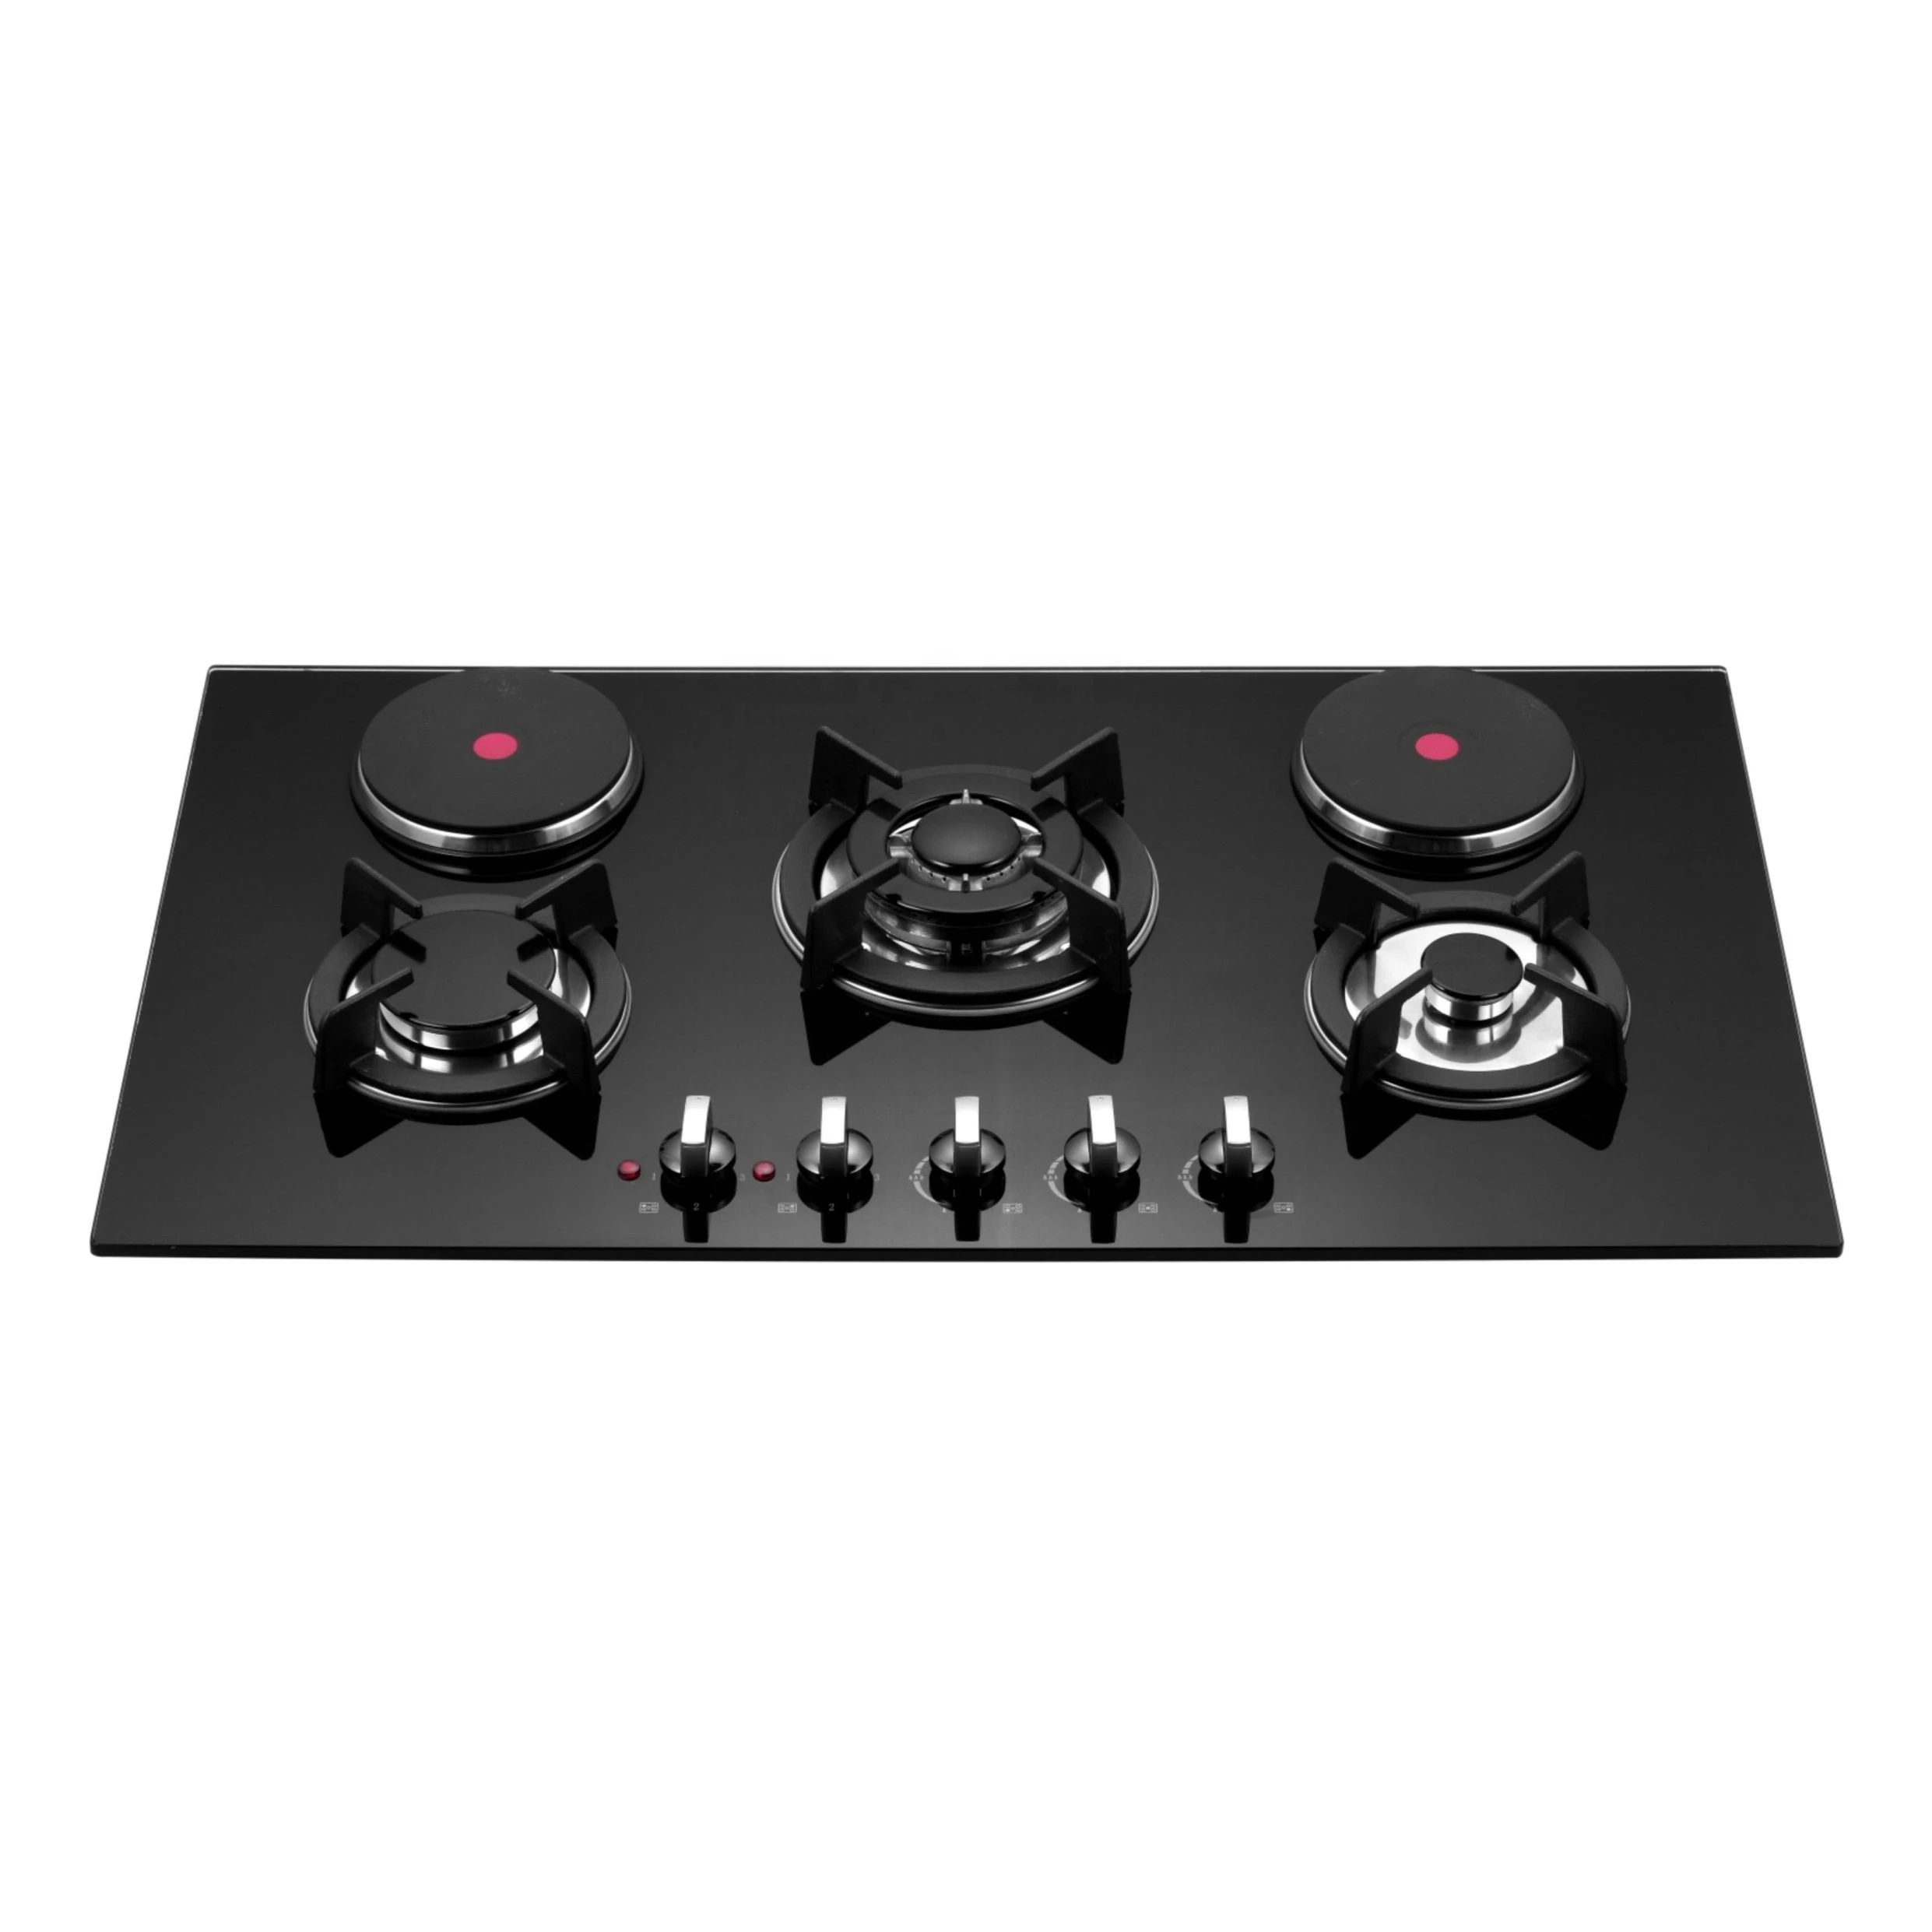 5 Burner 90cm Built in Gas Cooker Cooktop Tempered Glass Manufacturer China Ceramic / Glass with Hot Plate